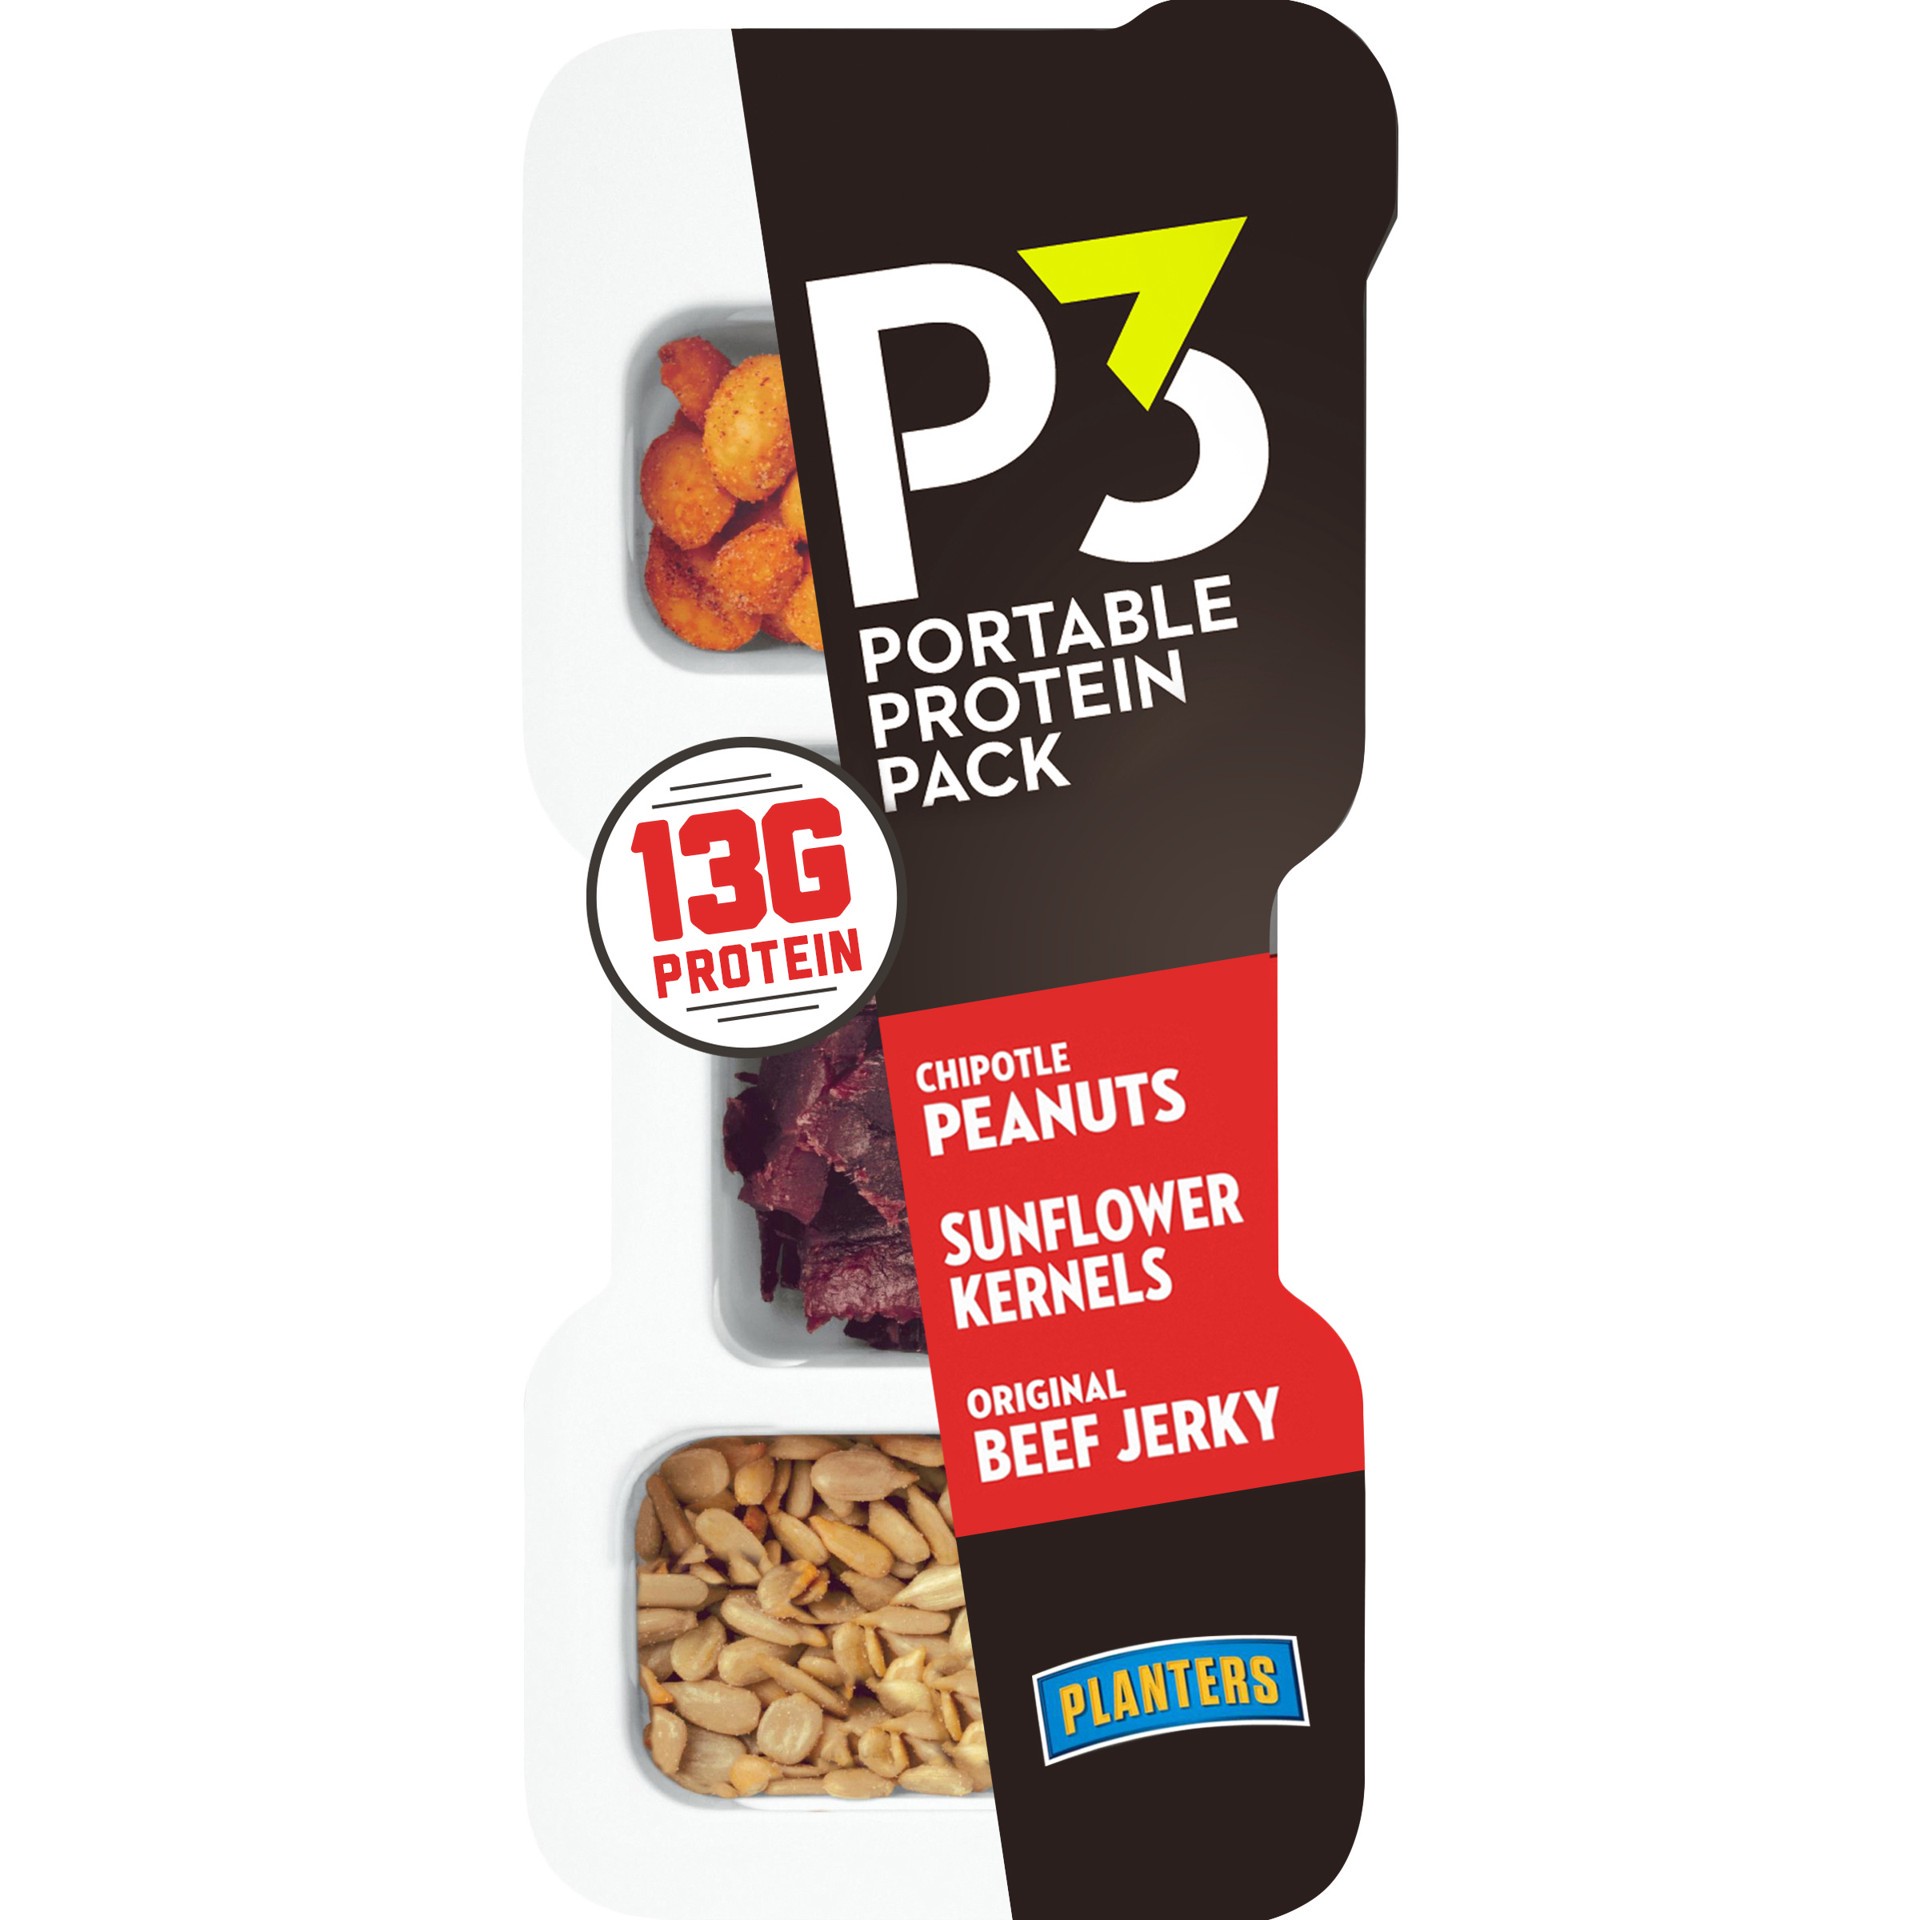 slide 1 of 10, P3 Planters P3 Chipotle Peanuts, Original Beef Jerky and Sunflower Kernels Protein Snack Pack, 1.8 oz Package, 1.8 oz